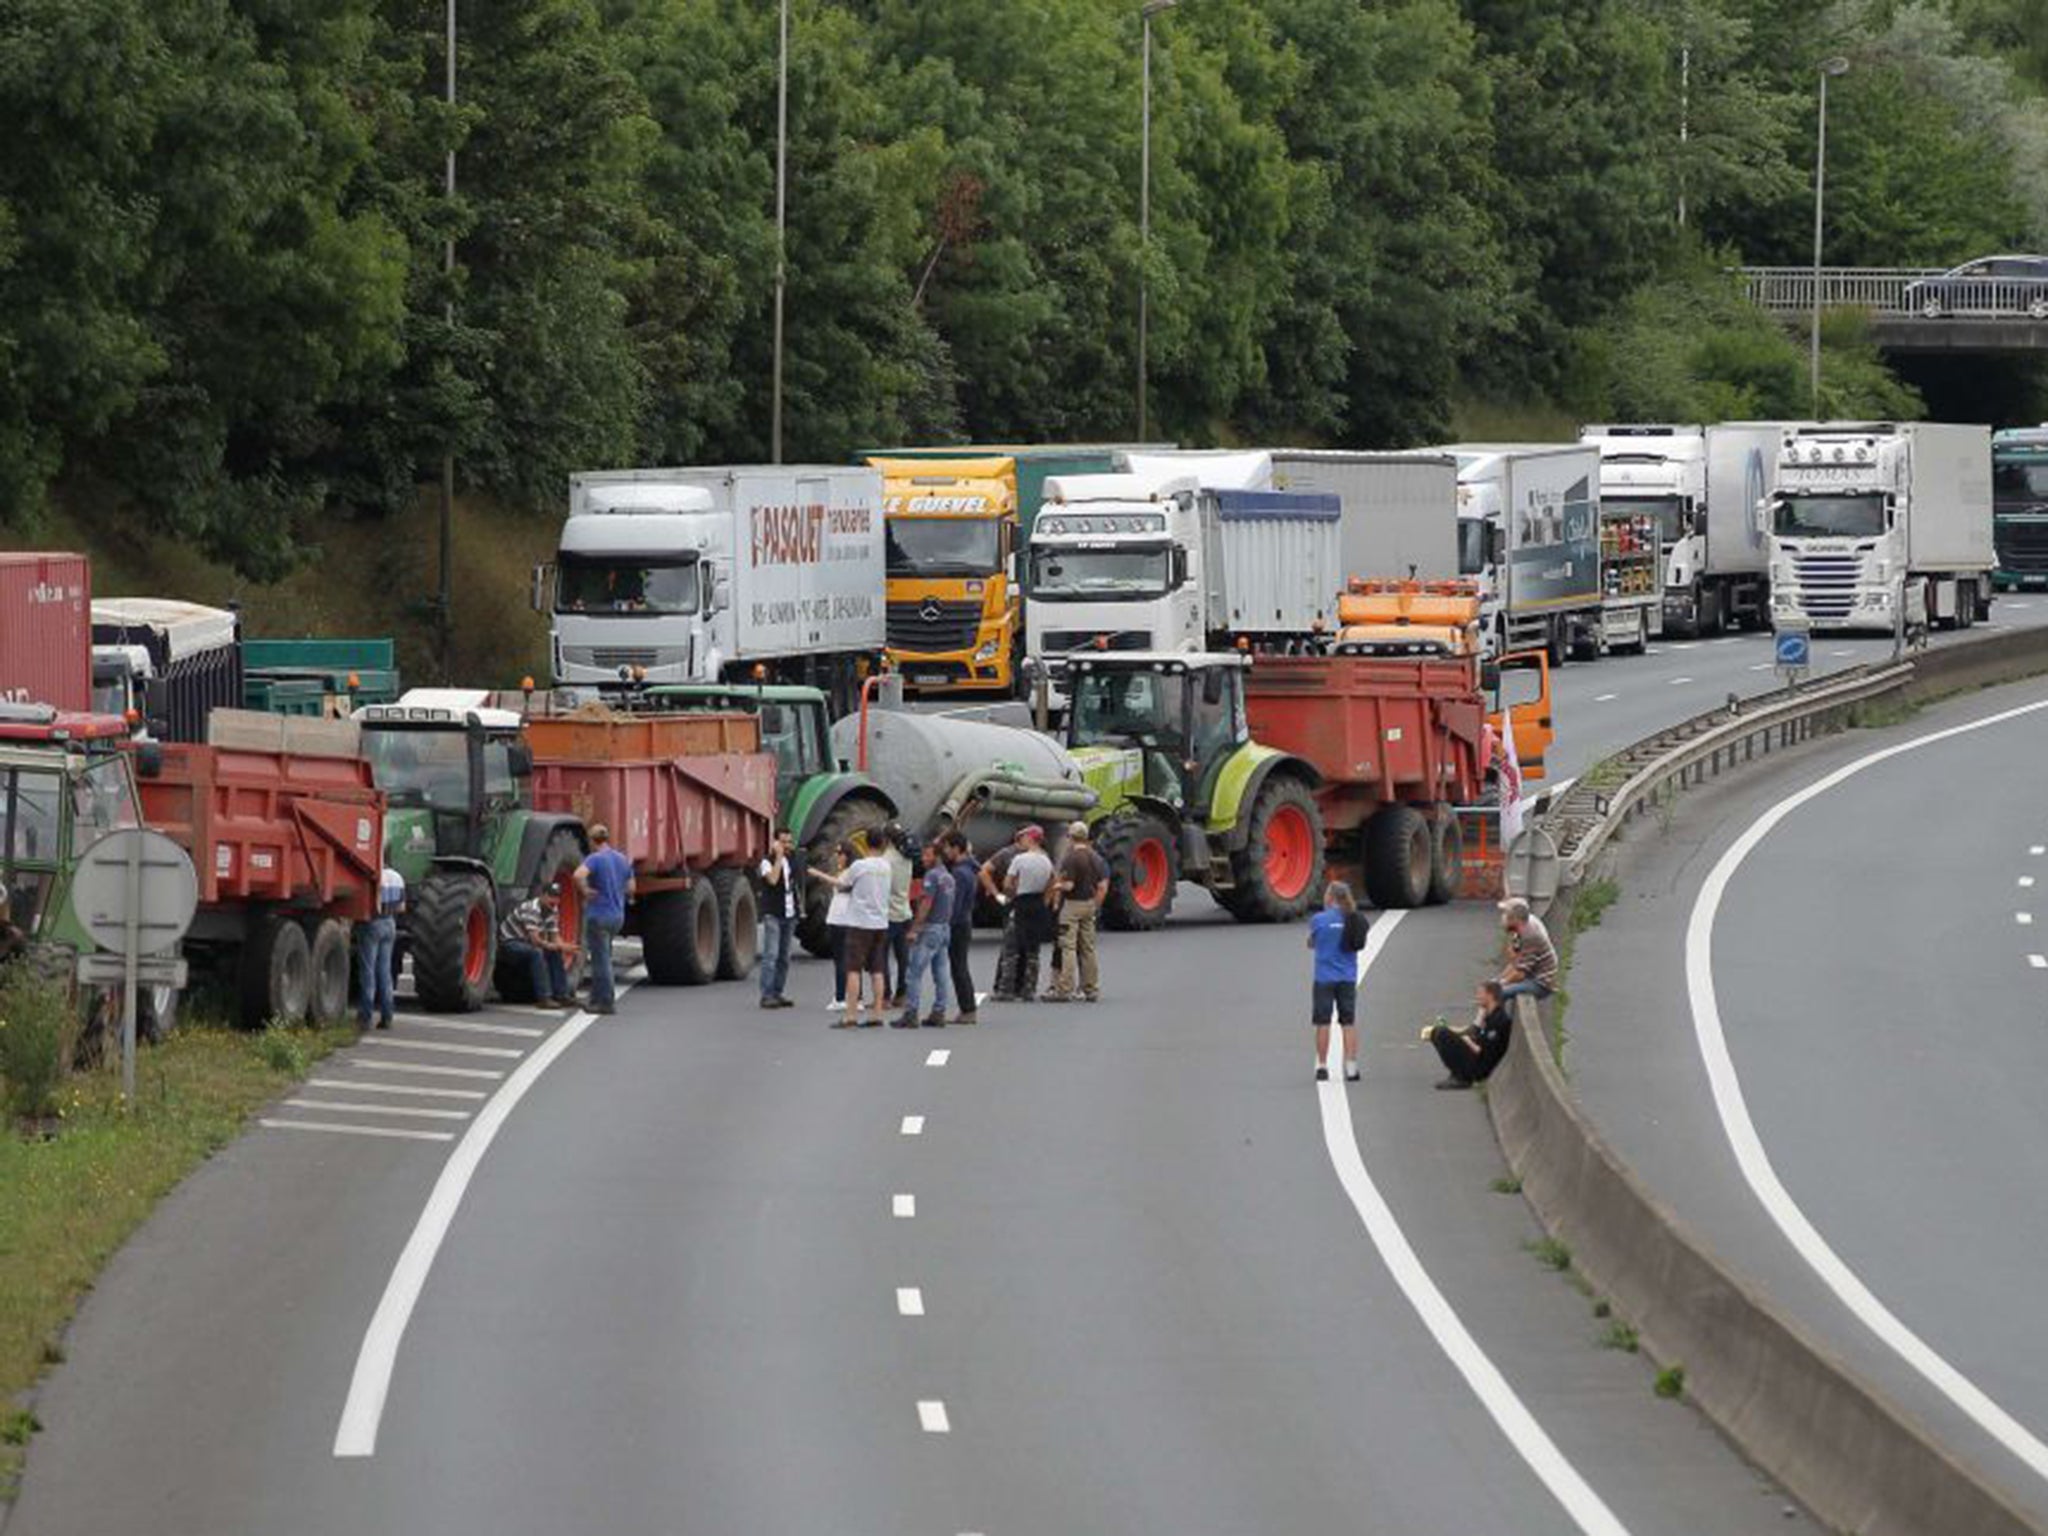 French farmers block a major road near Caen on Monday